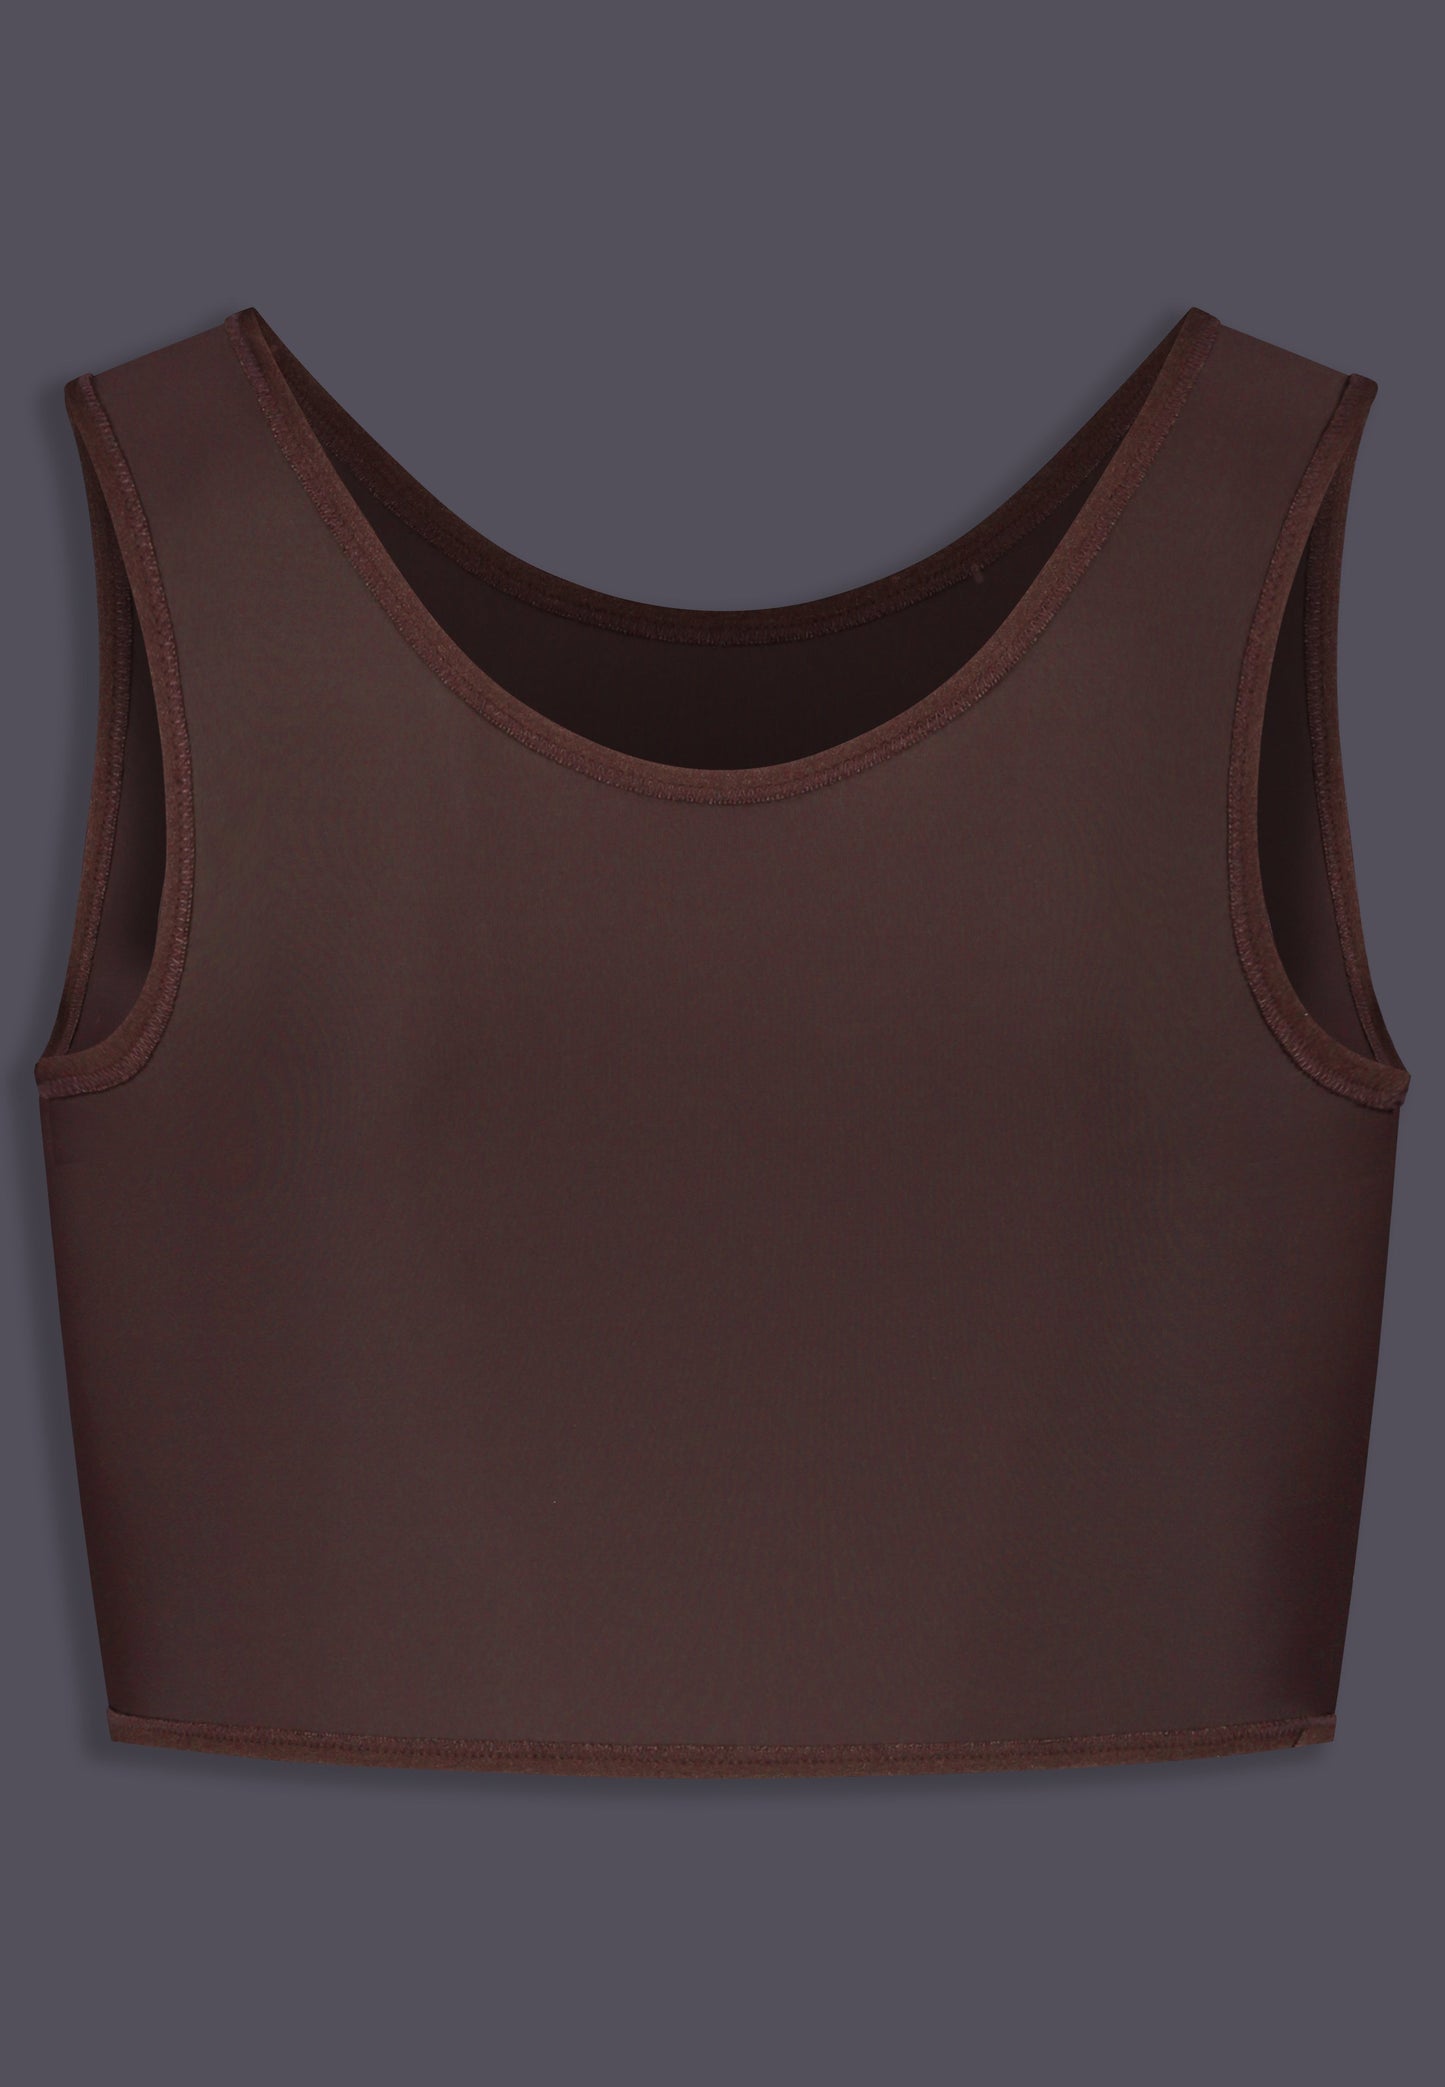 Product image of the back, short binder brown